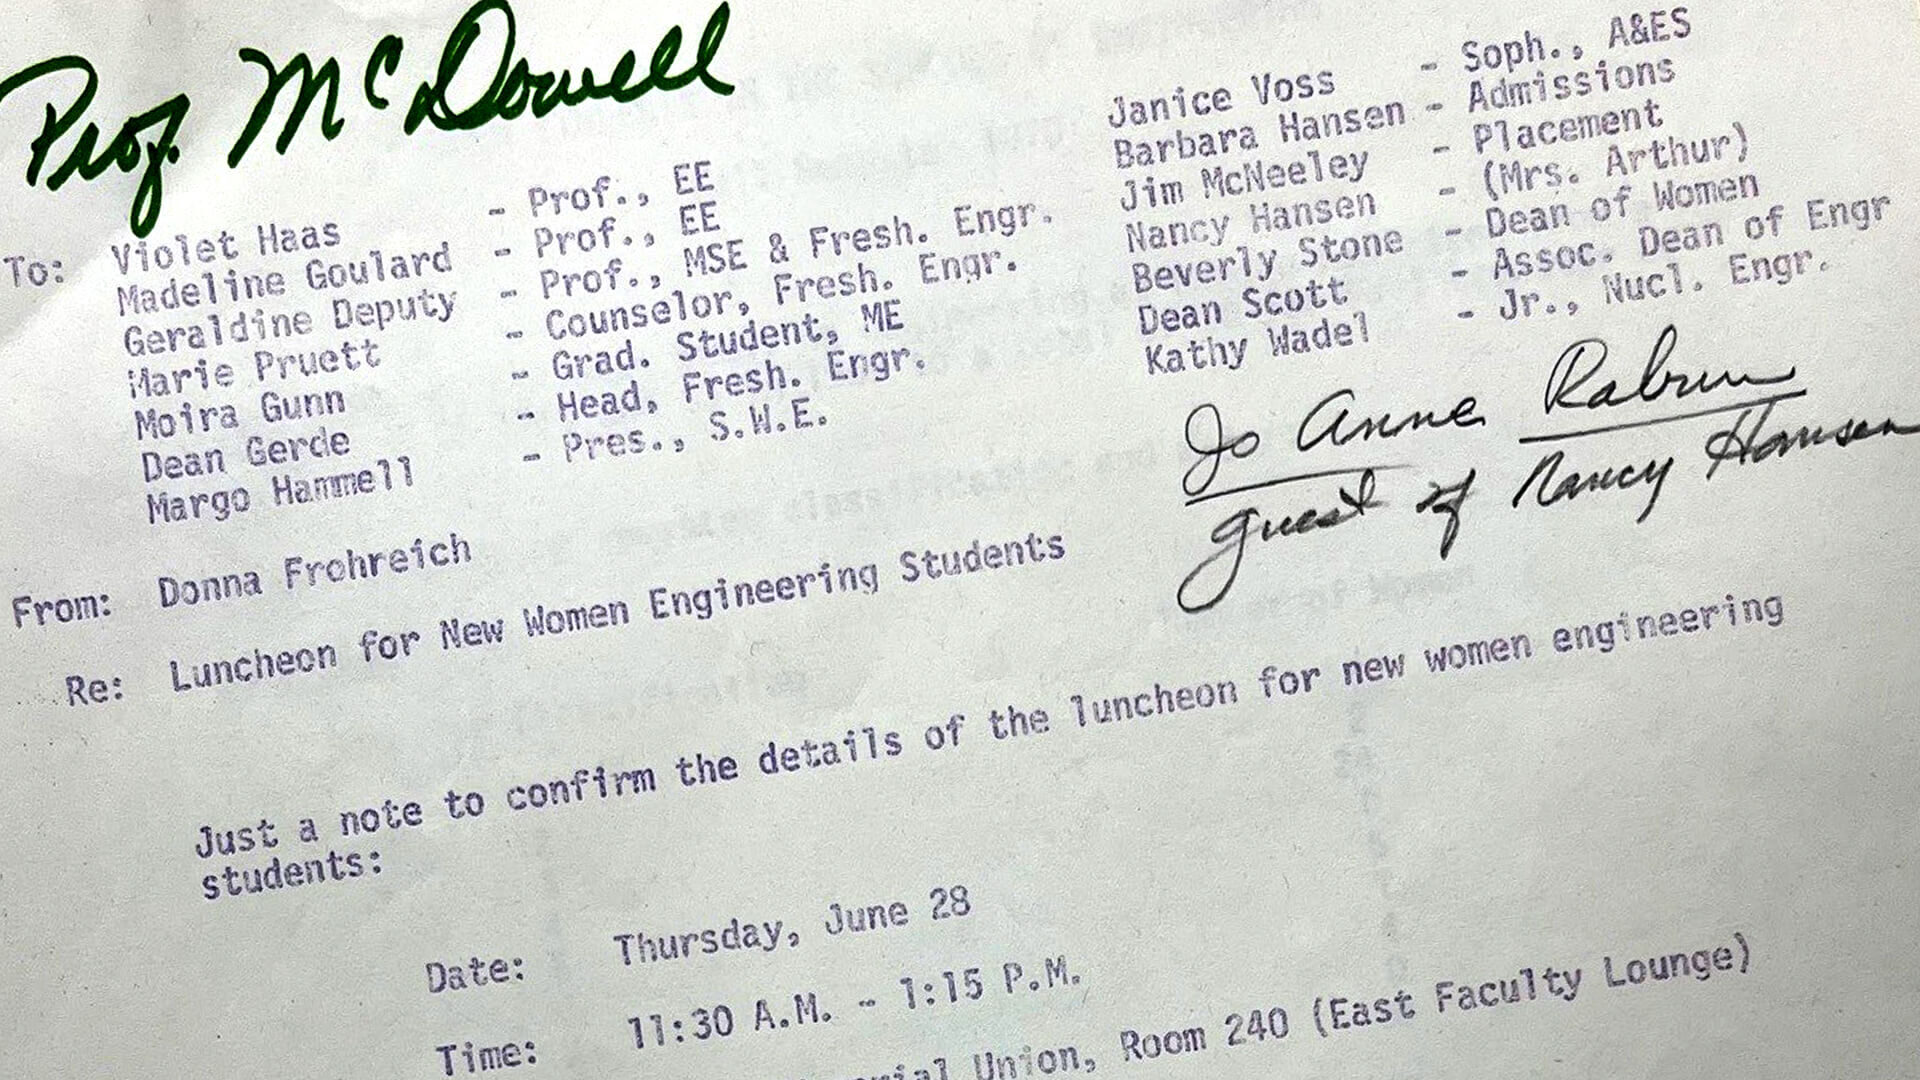 A 1970 memo from Donna Frohreich McKenzie, founding director of Purdue’s Women in Engineering Program